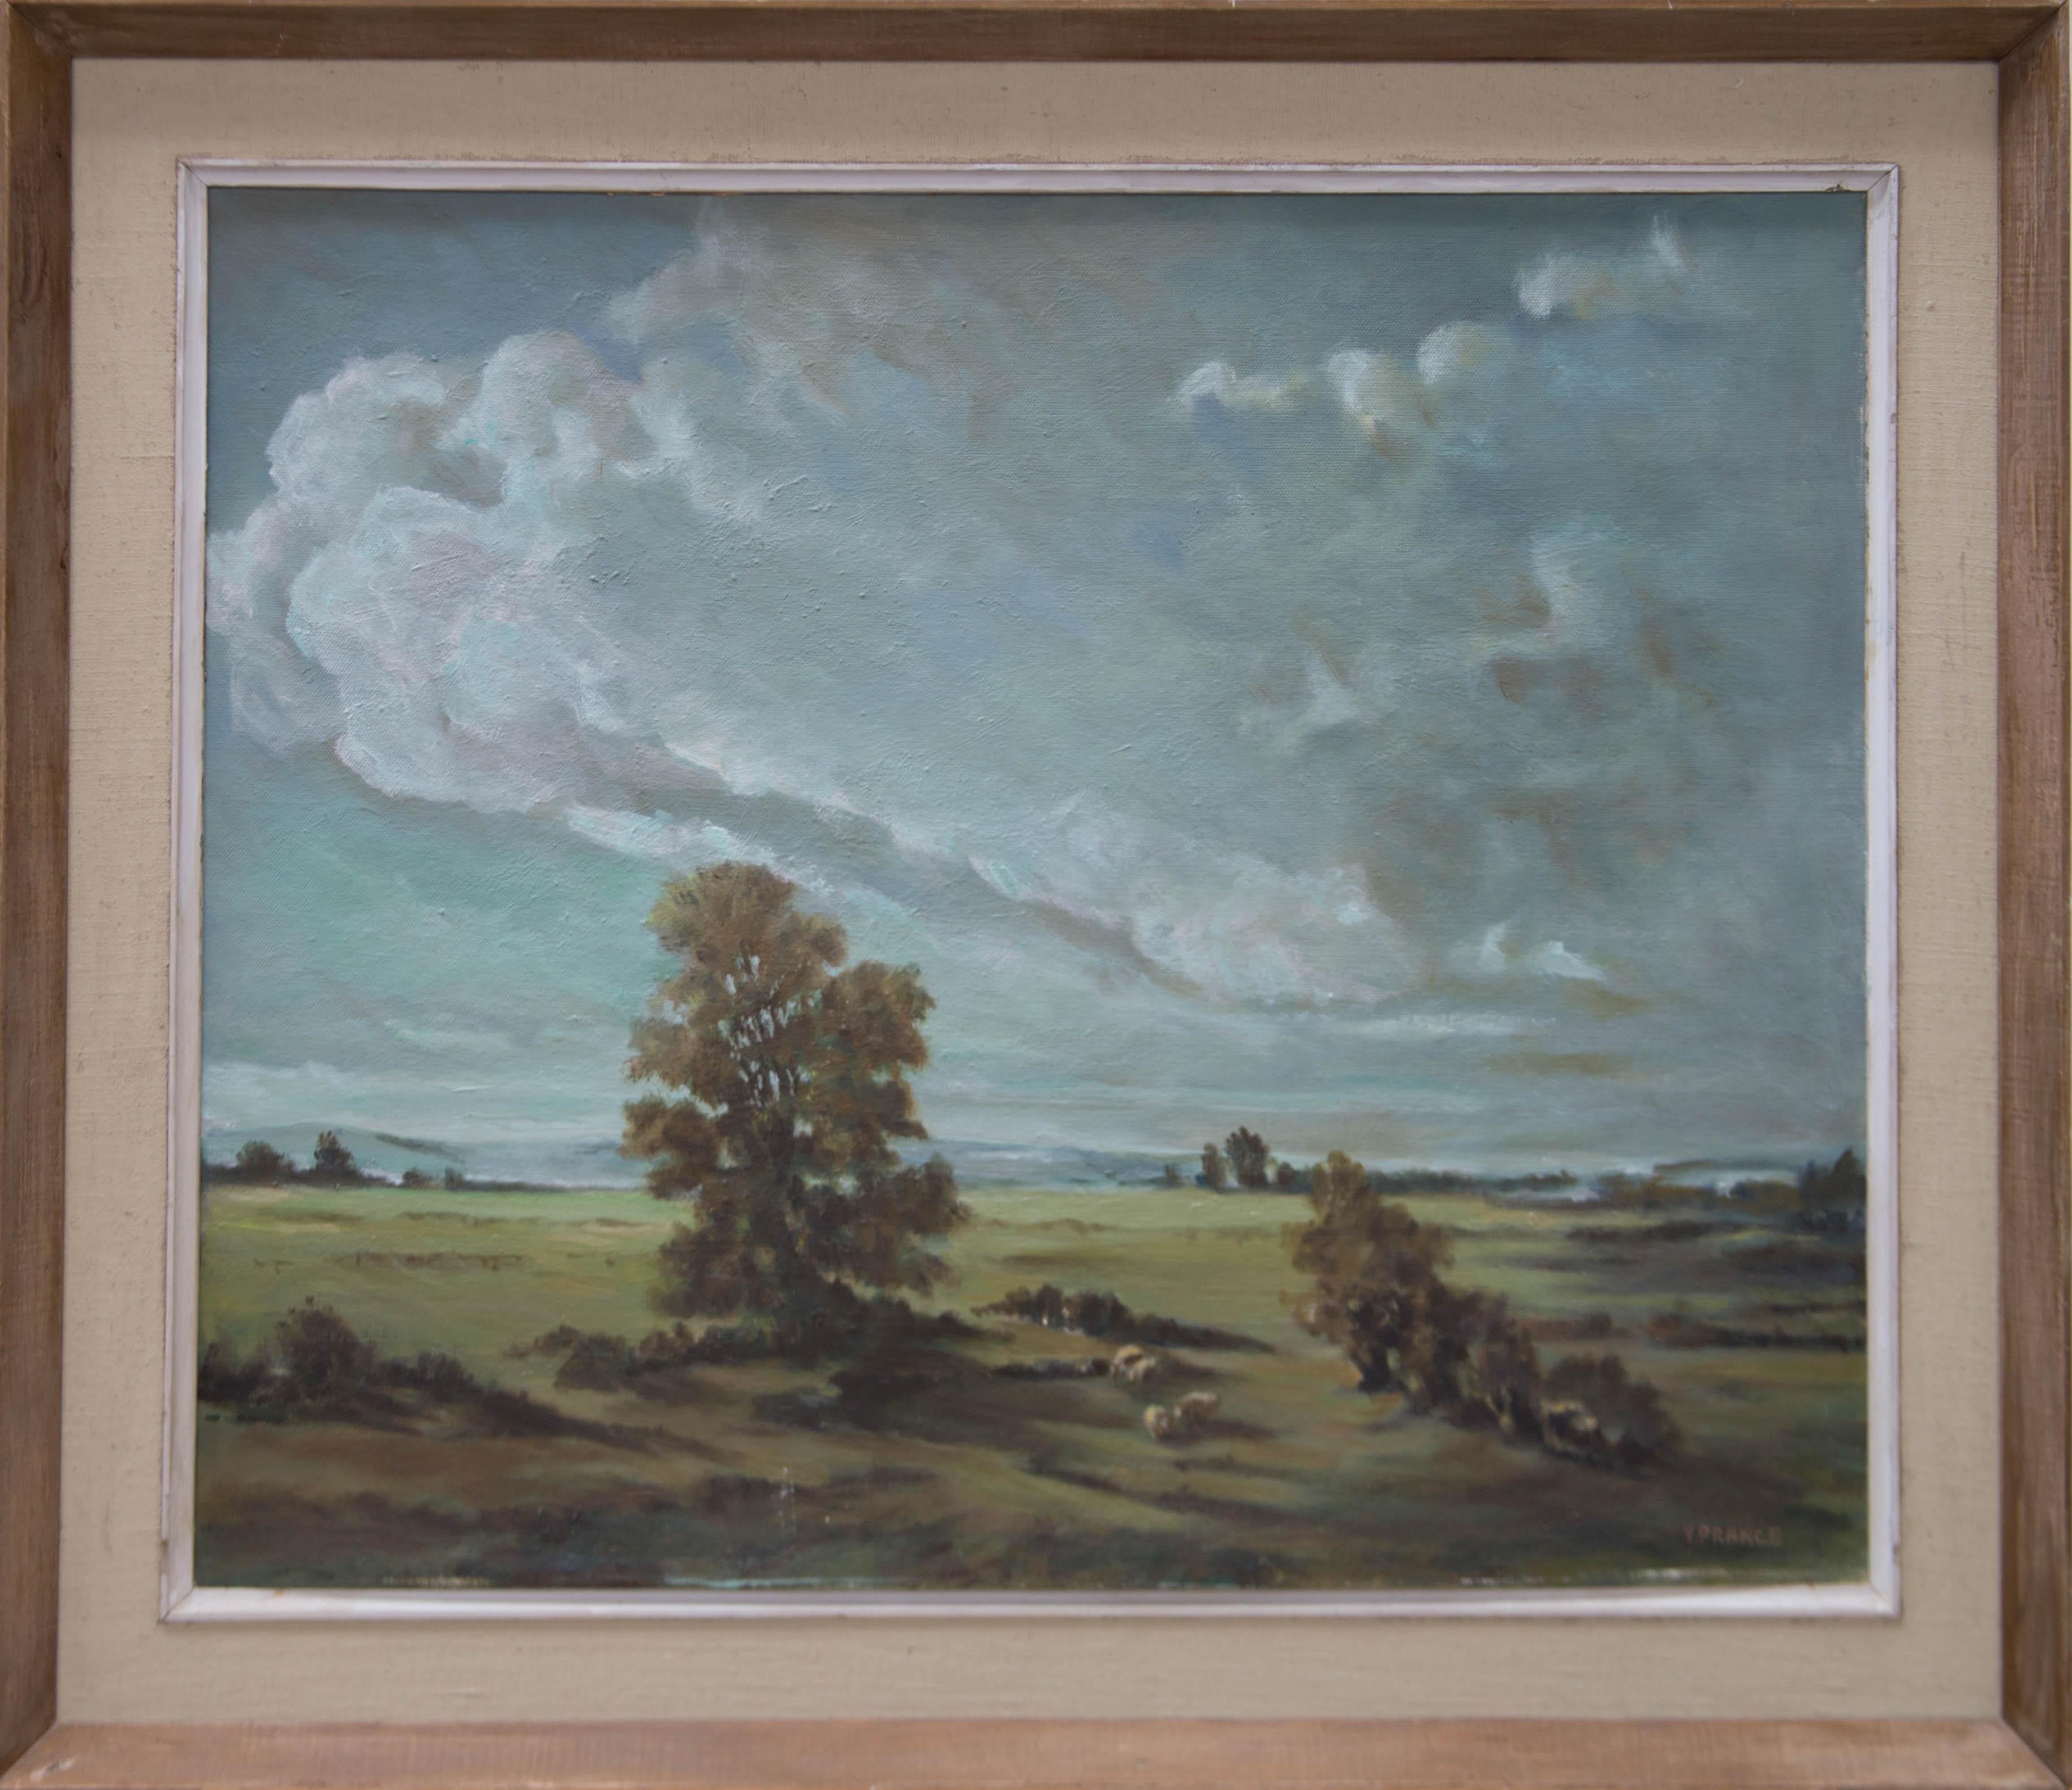 Unknown Landscape Painting - V. Prance - 20th Century Oil, Field View with Sheep